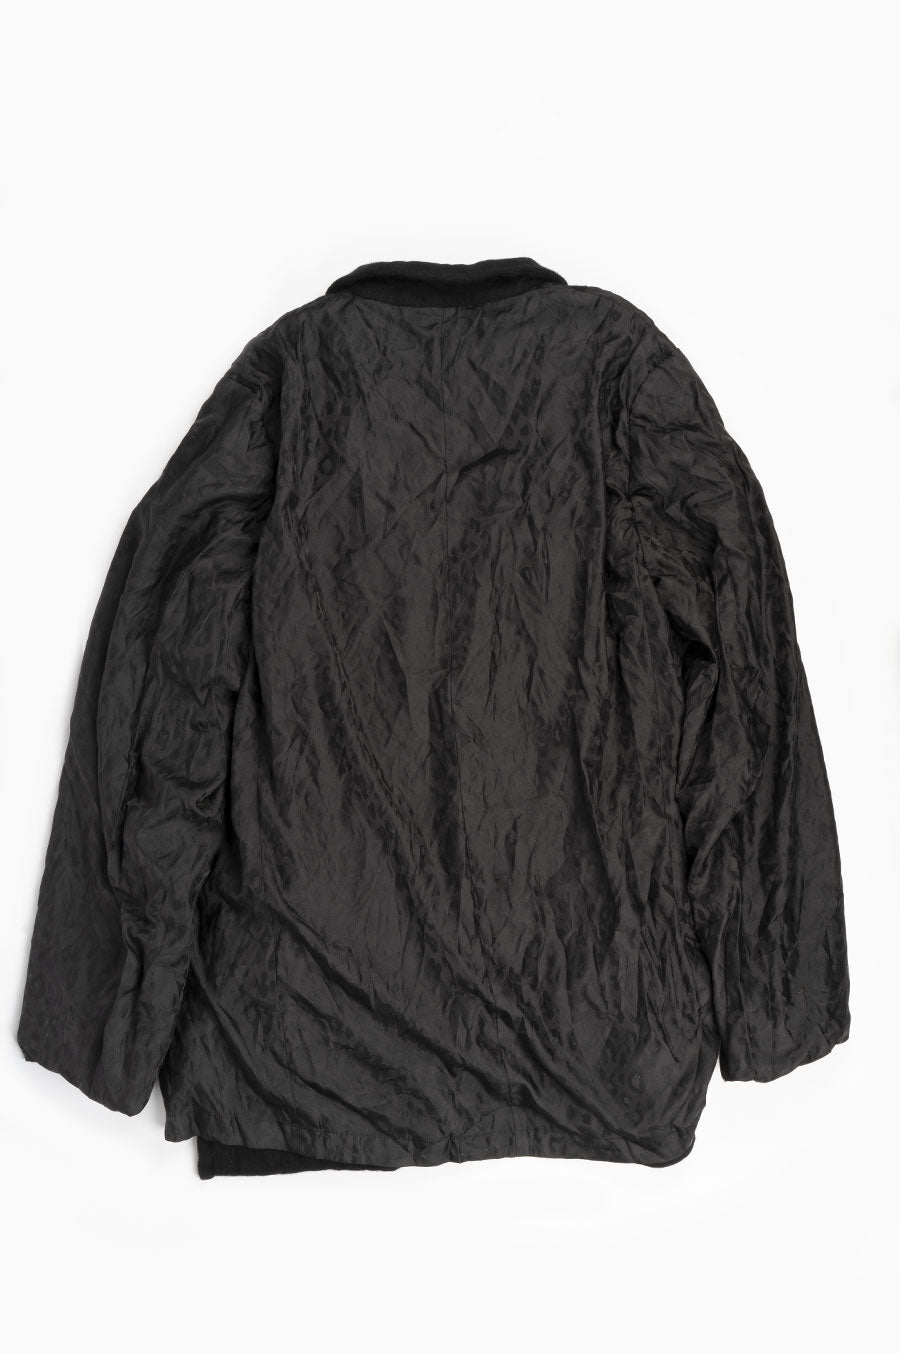 COMME DES GARCONS HOMME PLUS INSIDE OUT BOILED WOOL JACKET